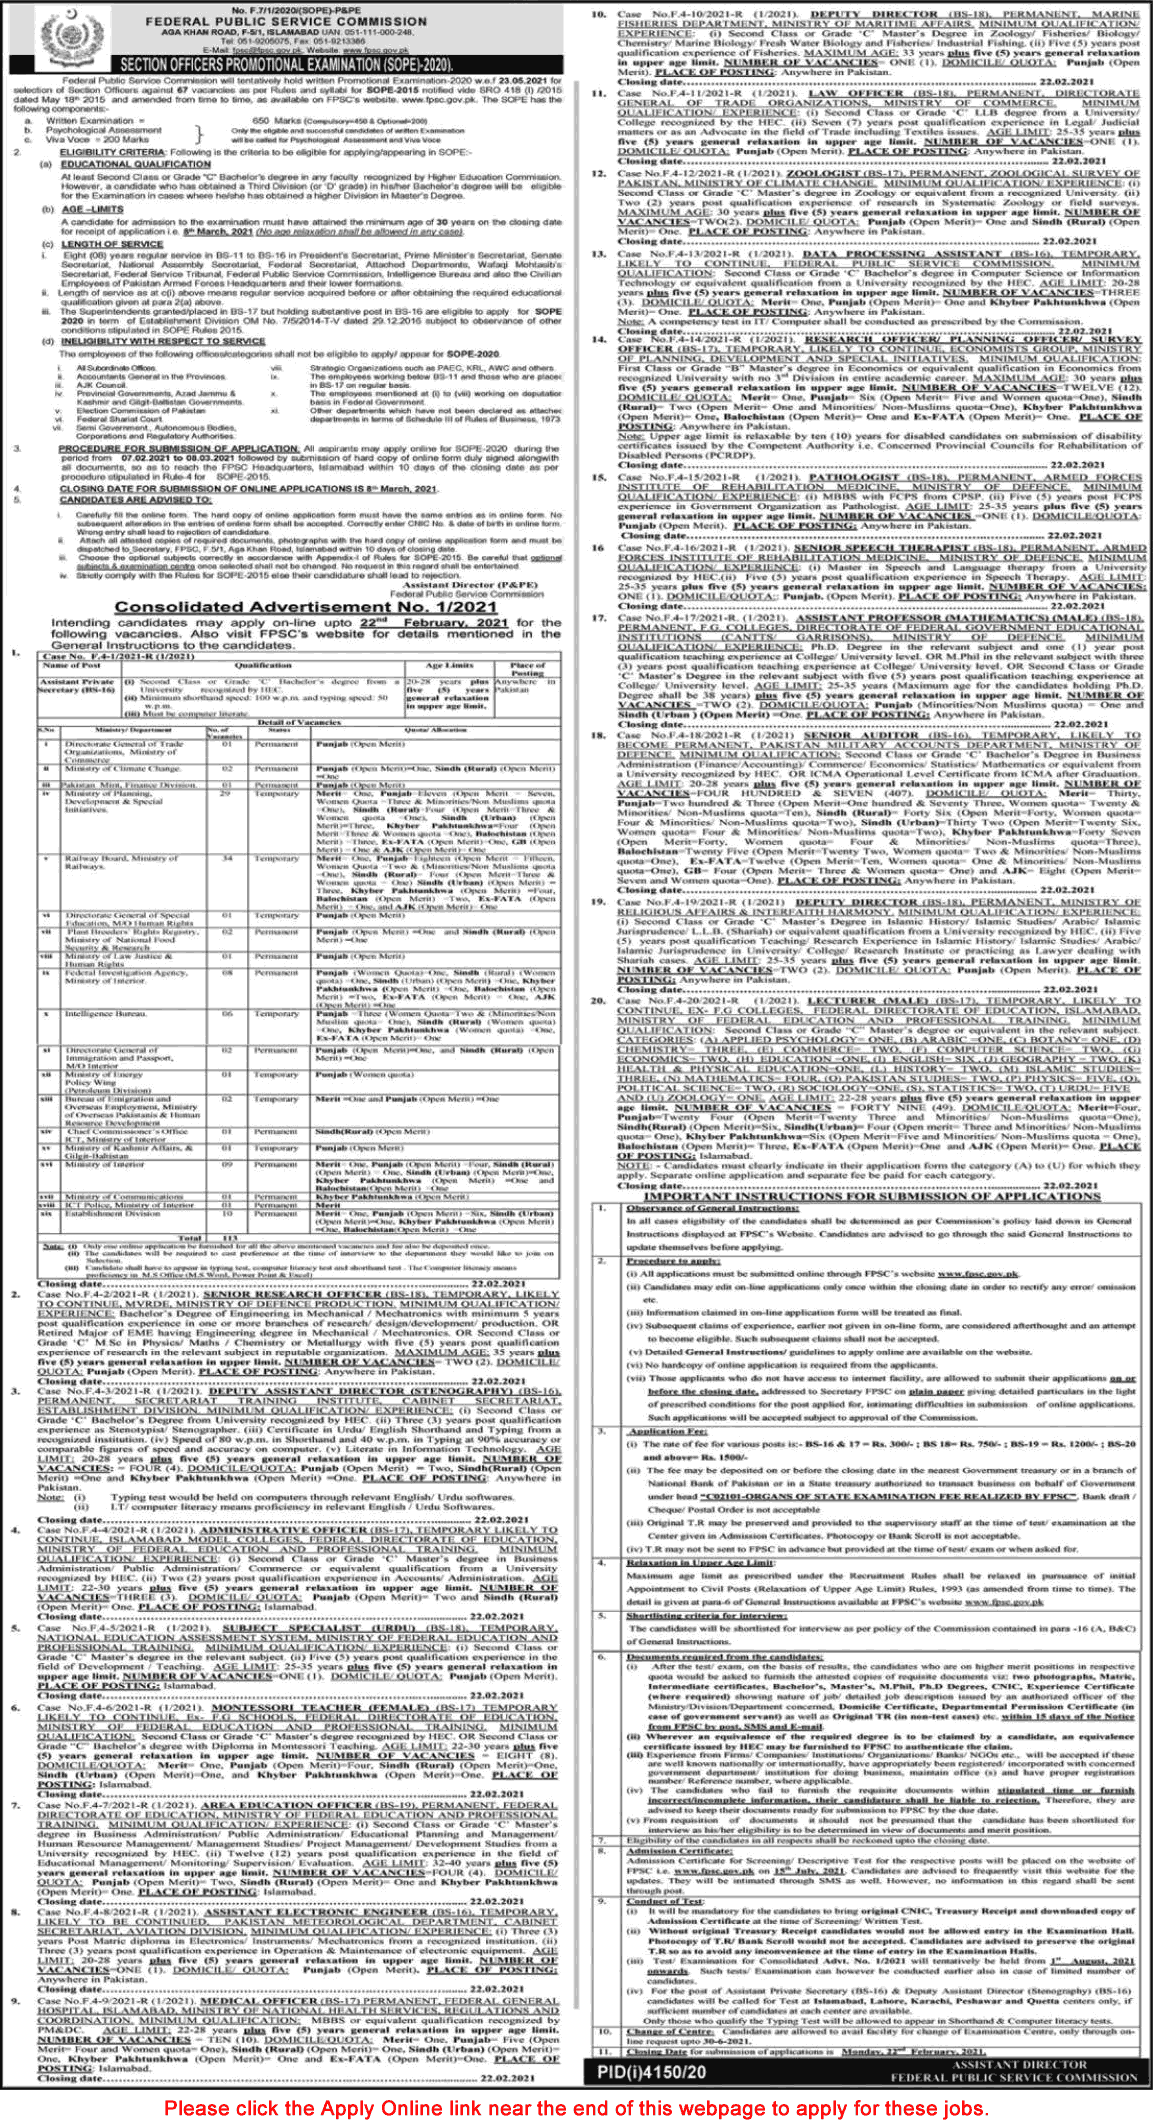 FPSC Jobs February 2021 Apply Online Consolidated Advertisement No 01/2021 1/2021 Latest